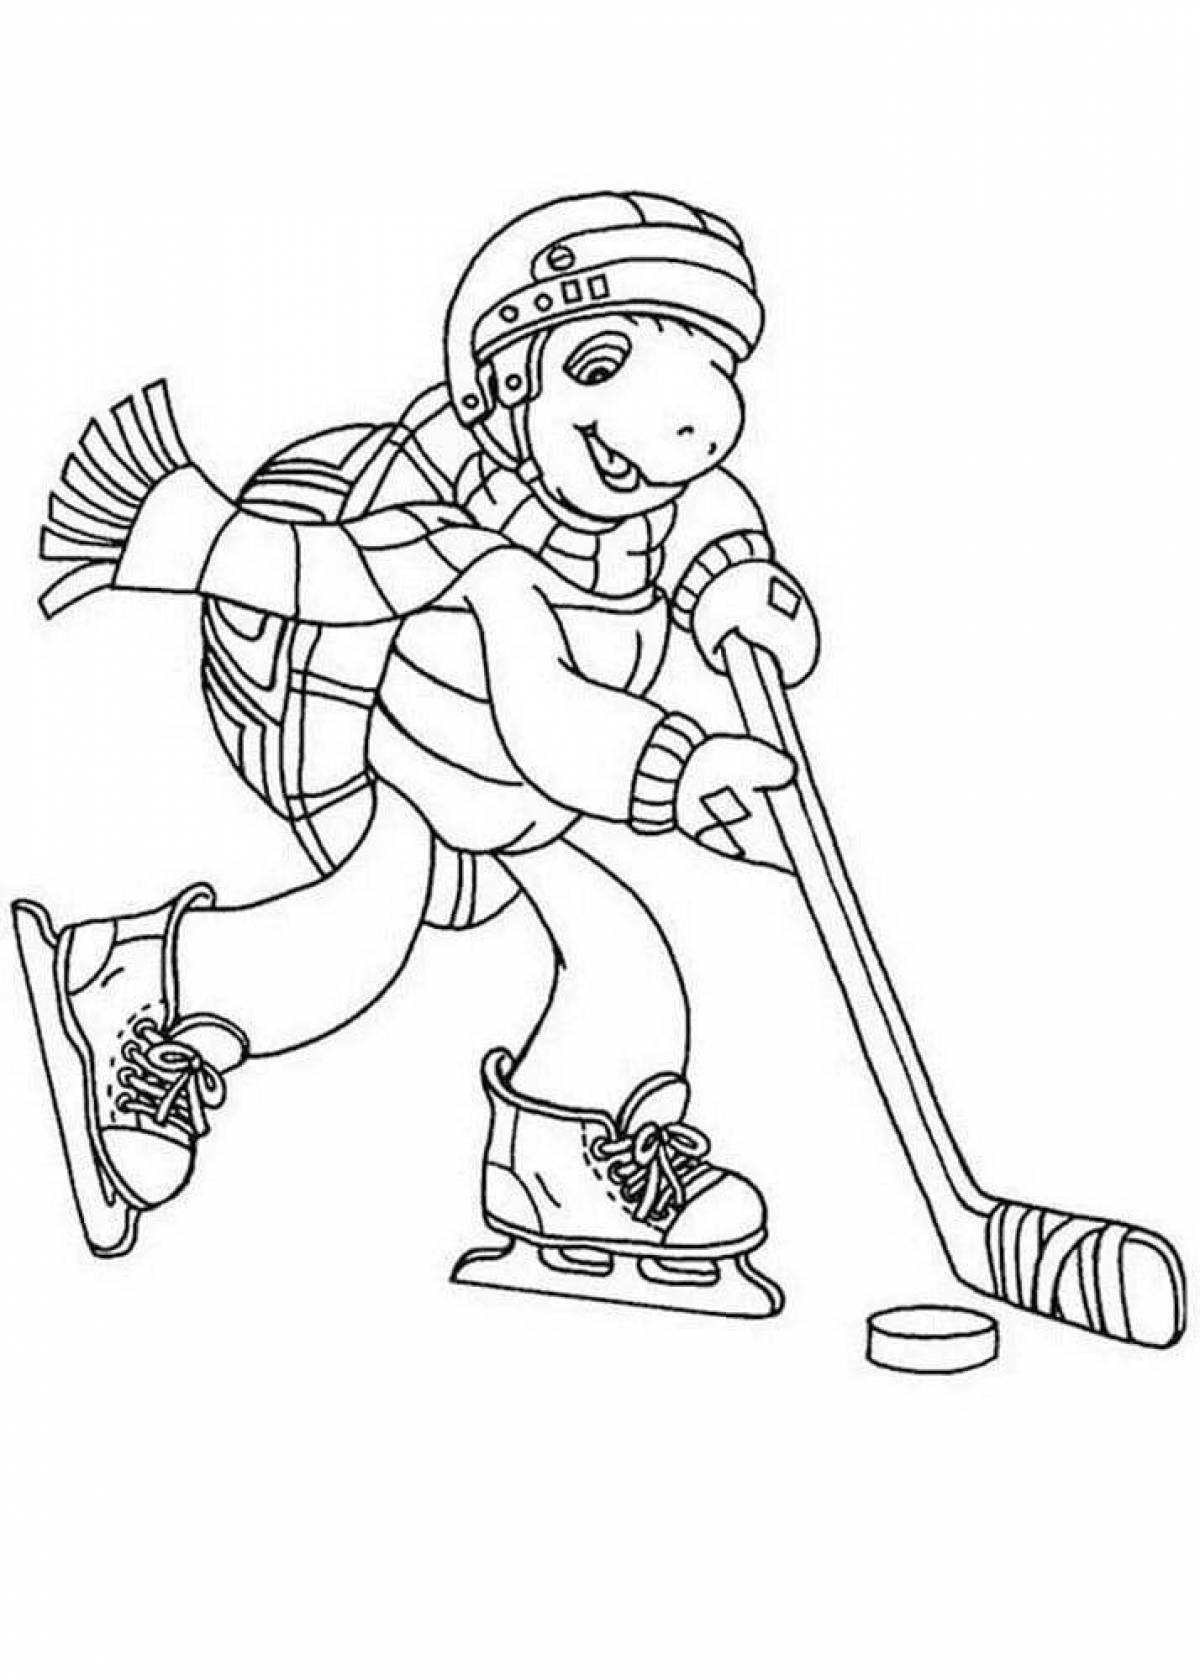 Winter sports coloring page